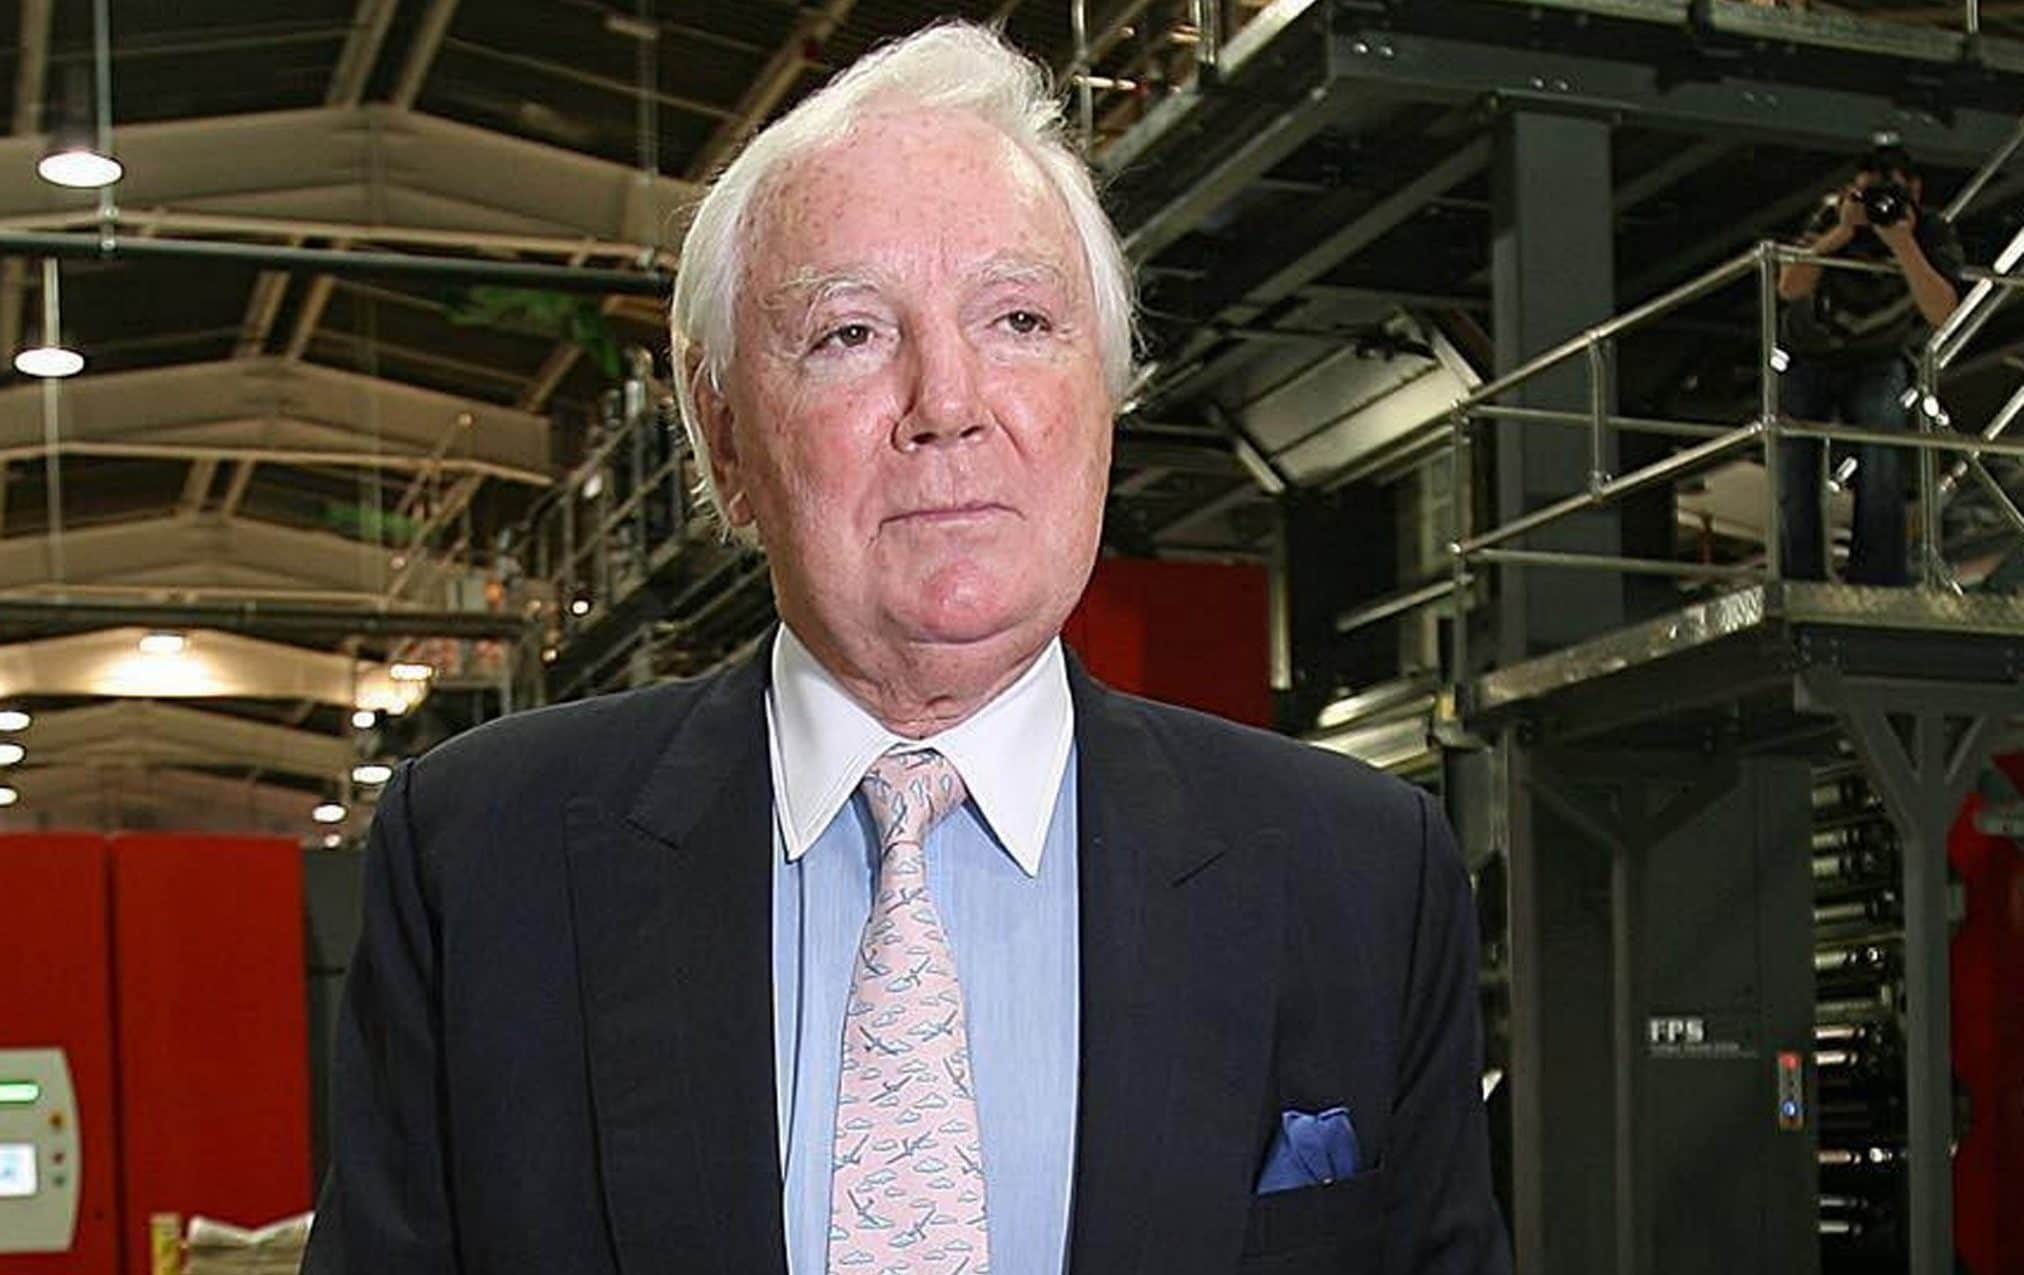 Irish business and rugby ‘giant’ Sir Tony O’Reilly dies aged 88